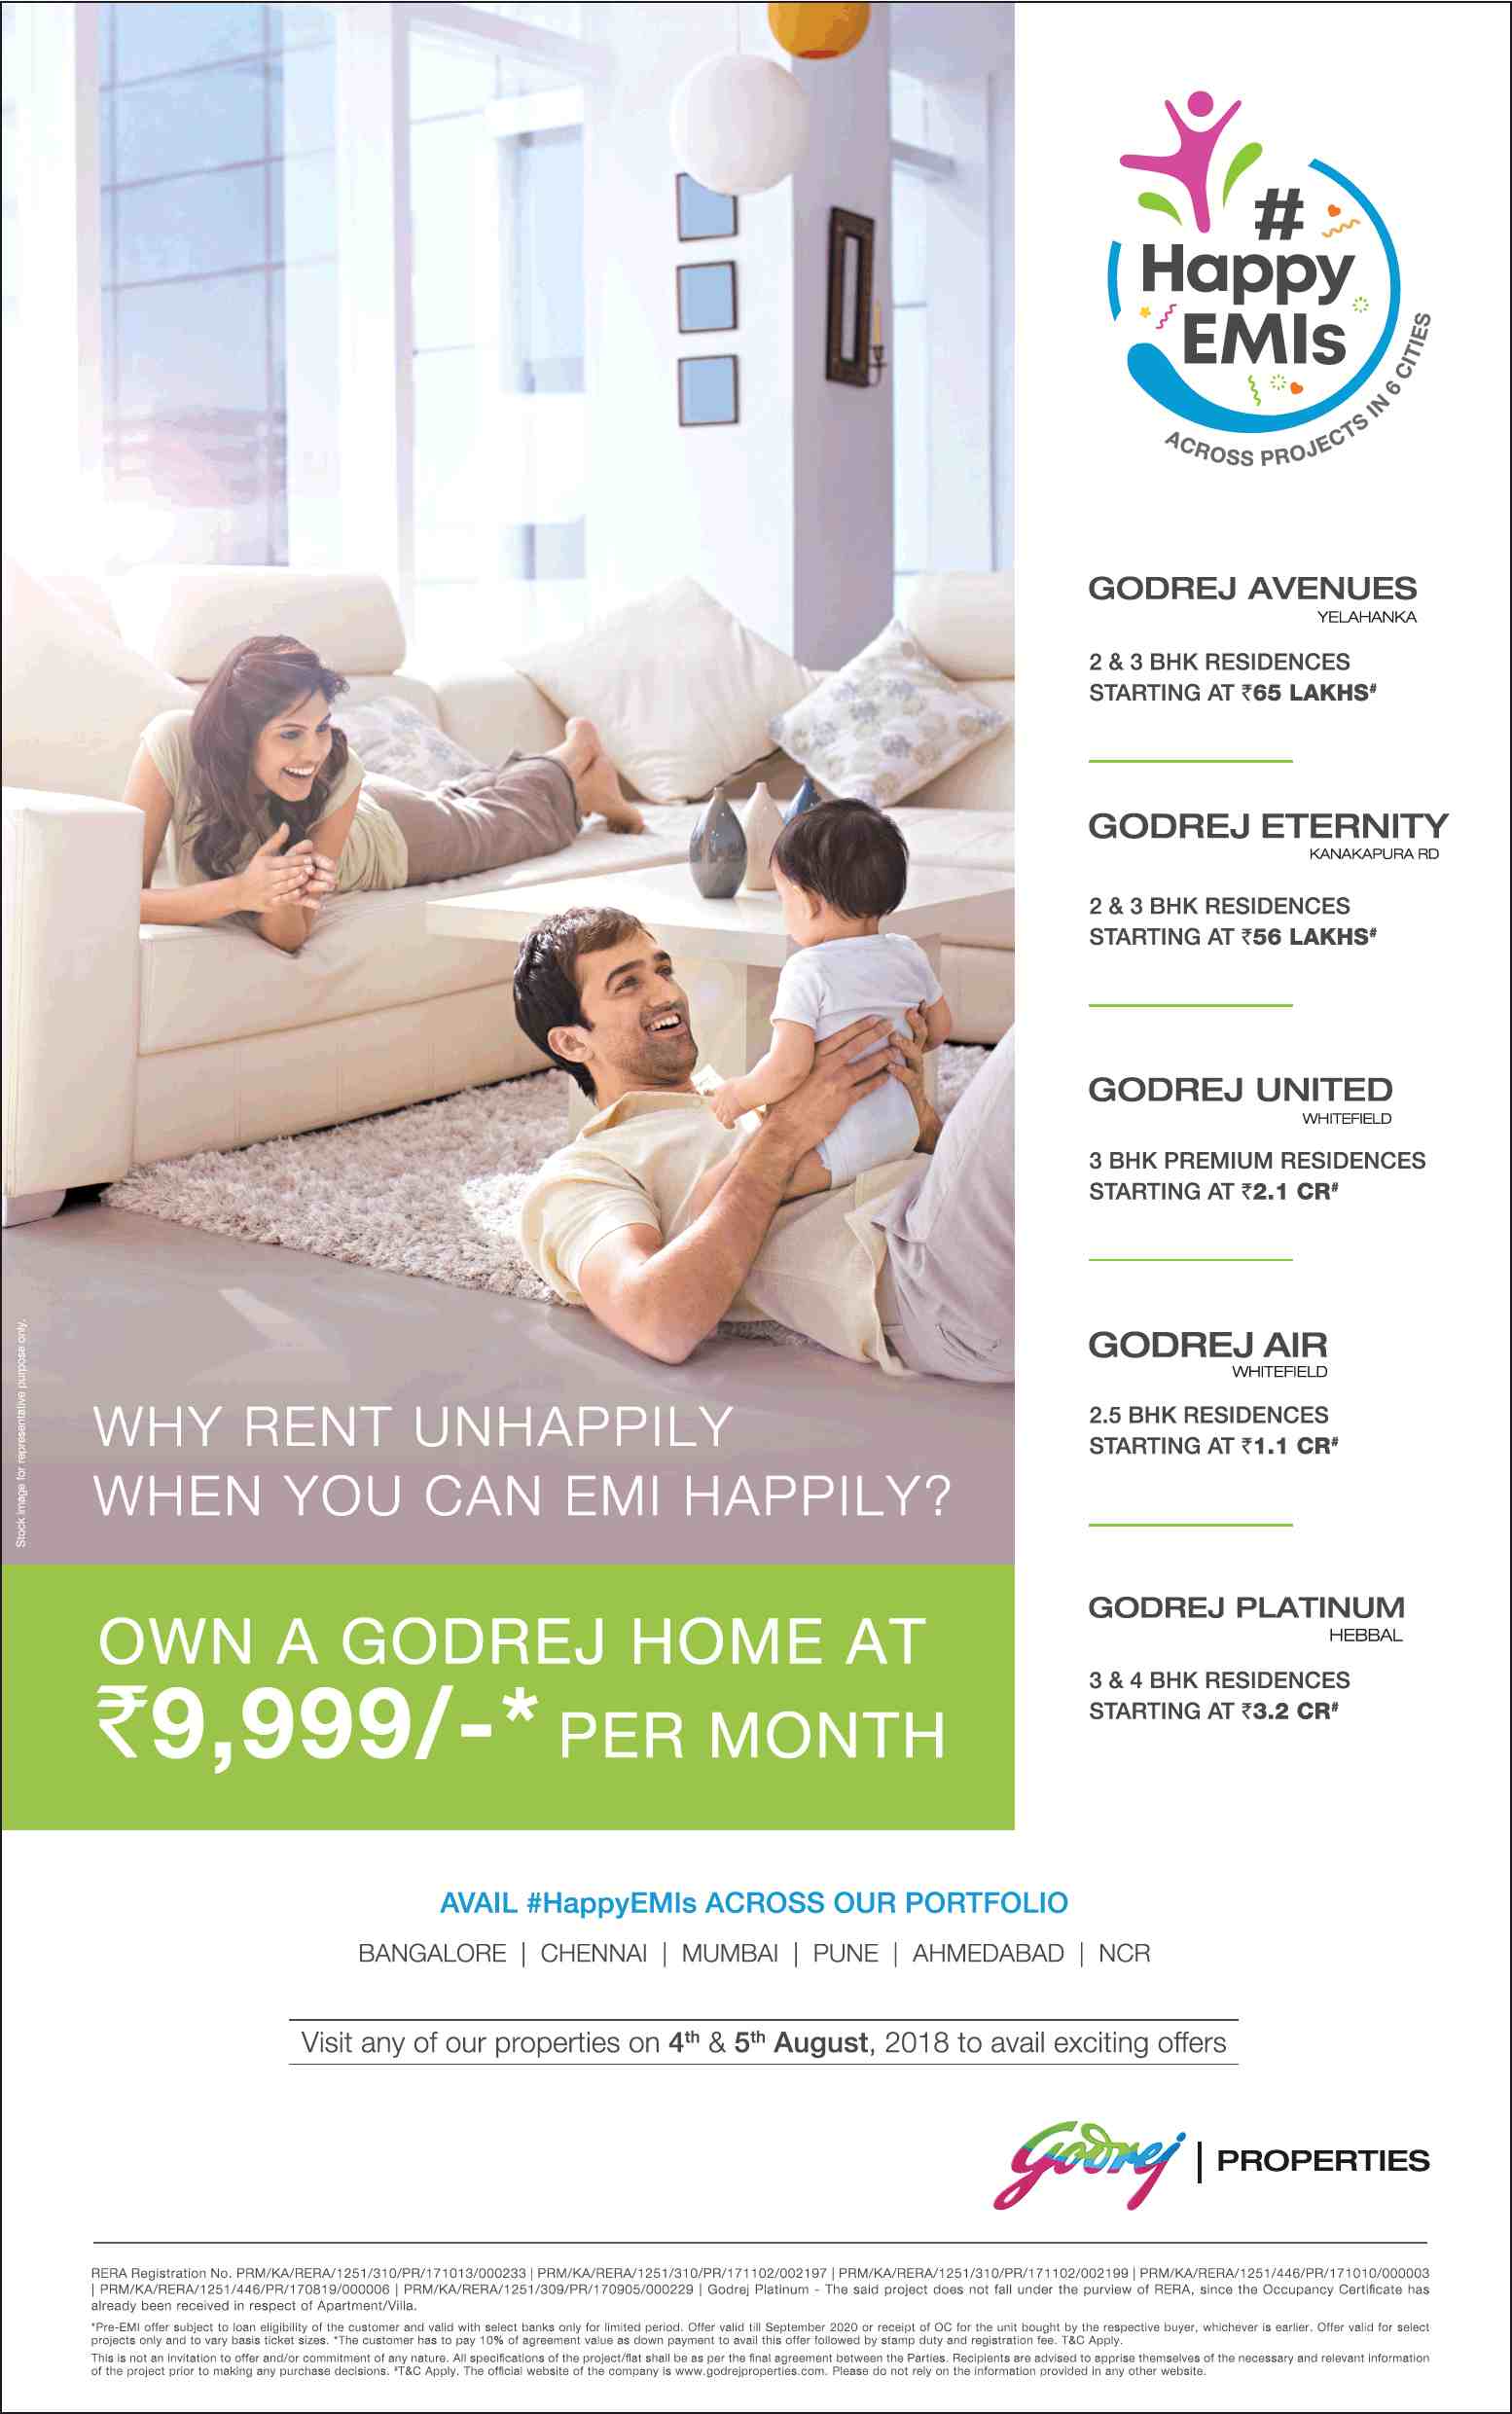 Own a Godrej Home @ just Rs. 9999 p.m. with Happy EMIs Offer in Bangalore Update